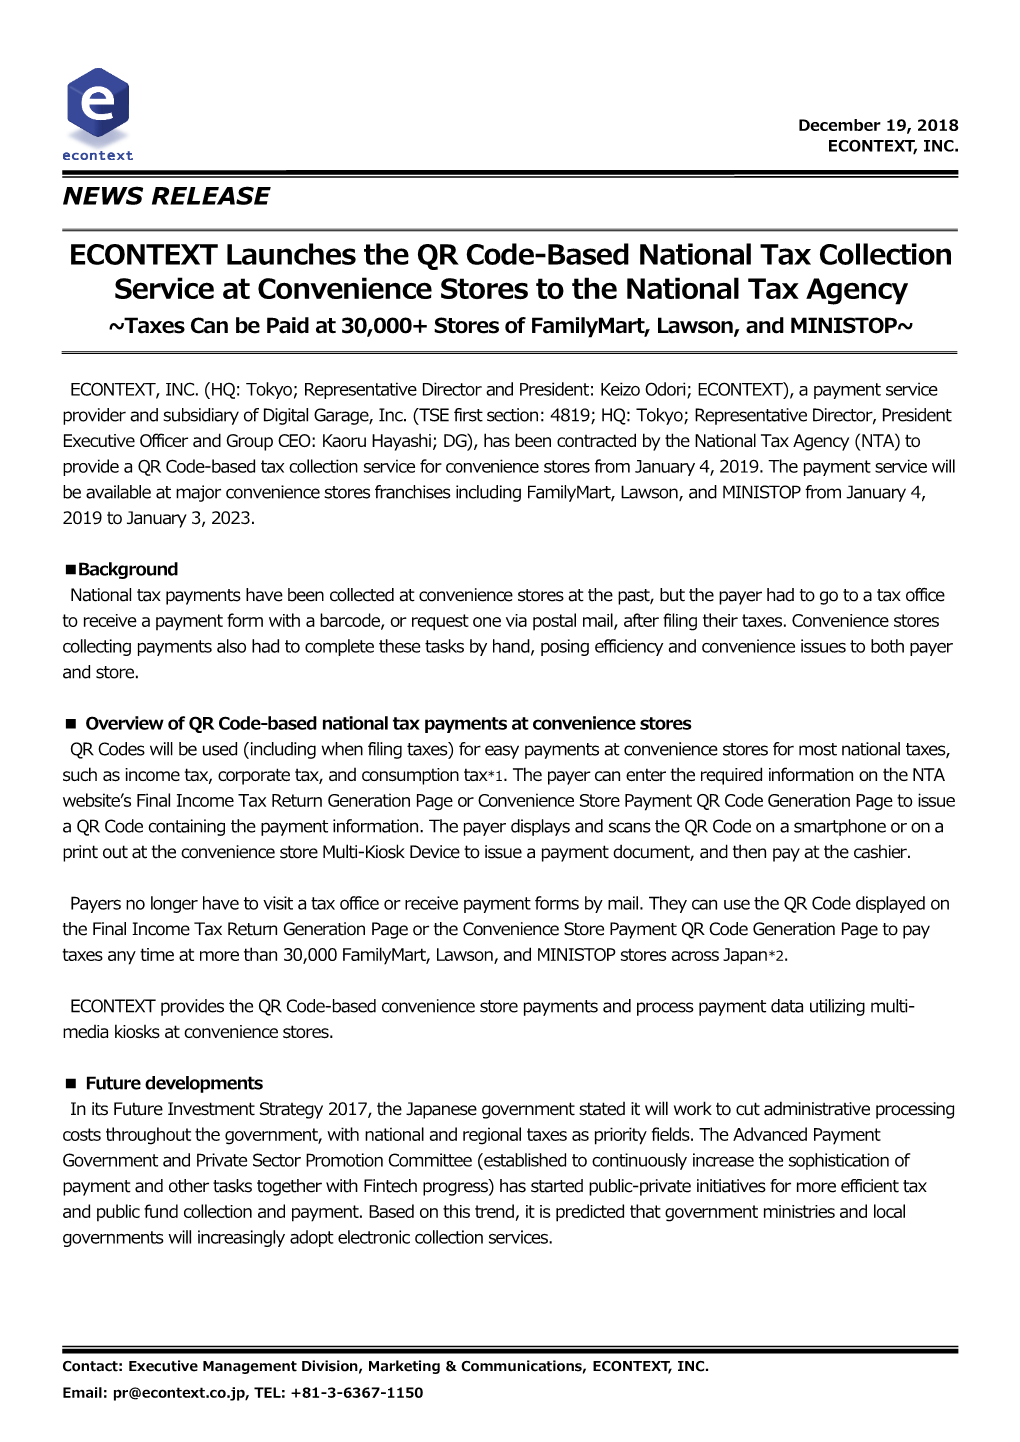 ECONTEXT Launches the QR Code-Based National Tax Collection Service at Convenience Stores to the National Tax Agency